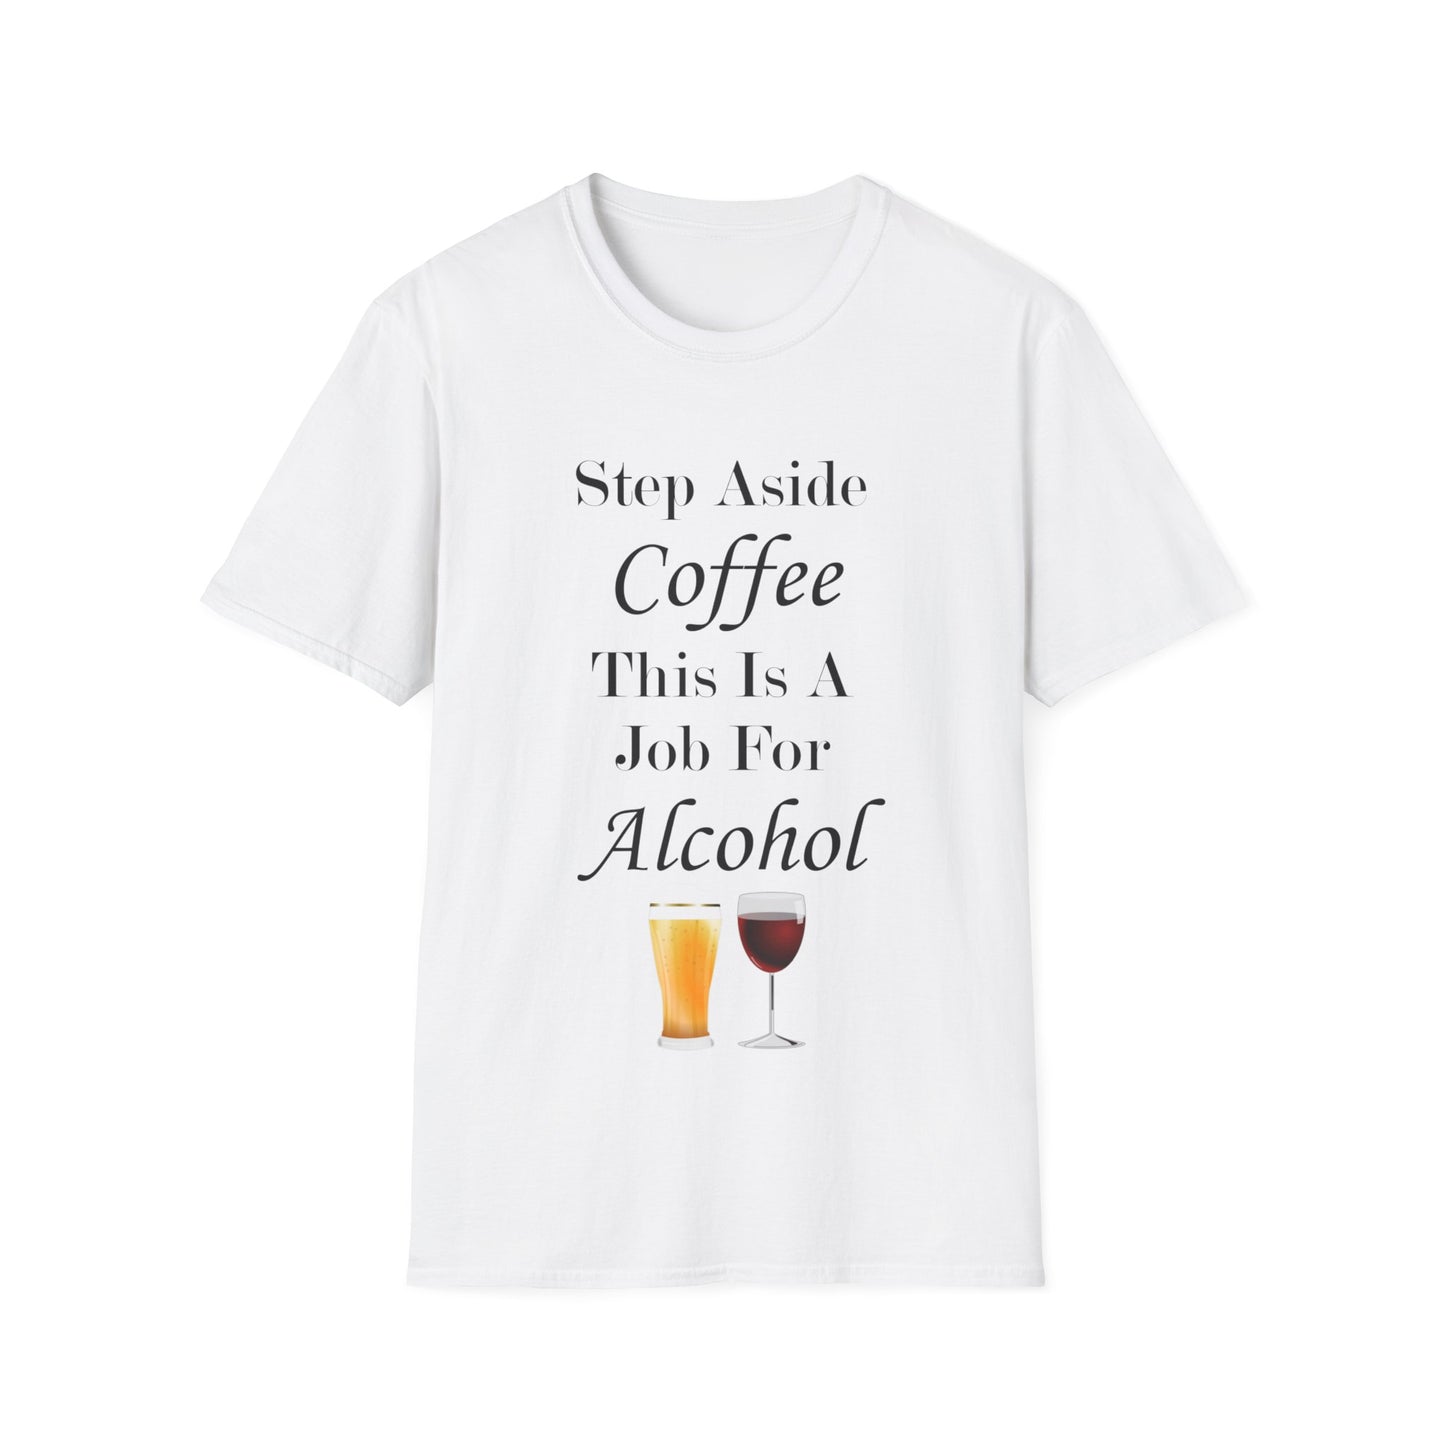 A white t-shirt with the funny quote: Step Aside Coffee This Is A Job For Alcohol. A beer and wine glass is underneath the quote